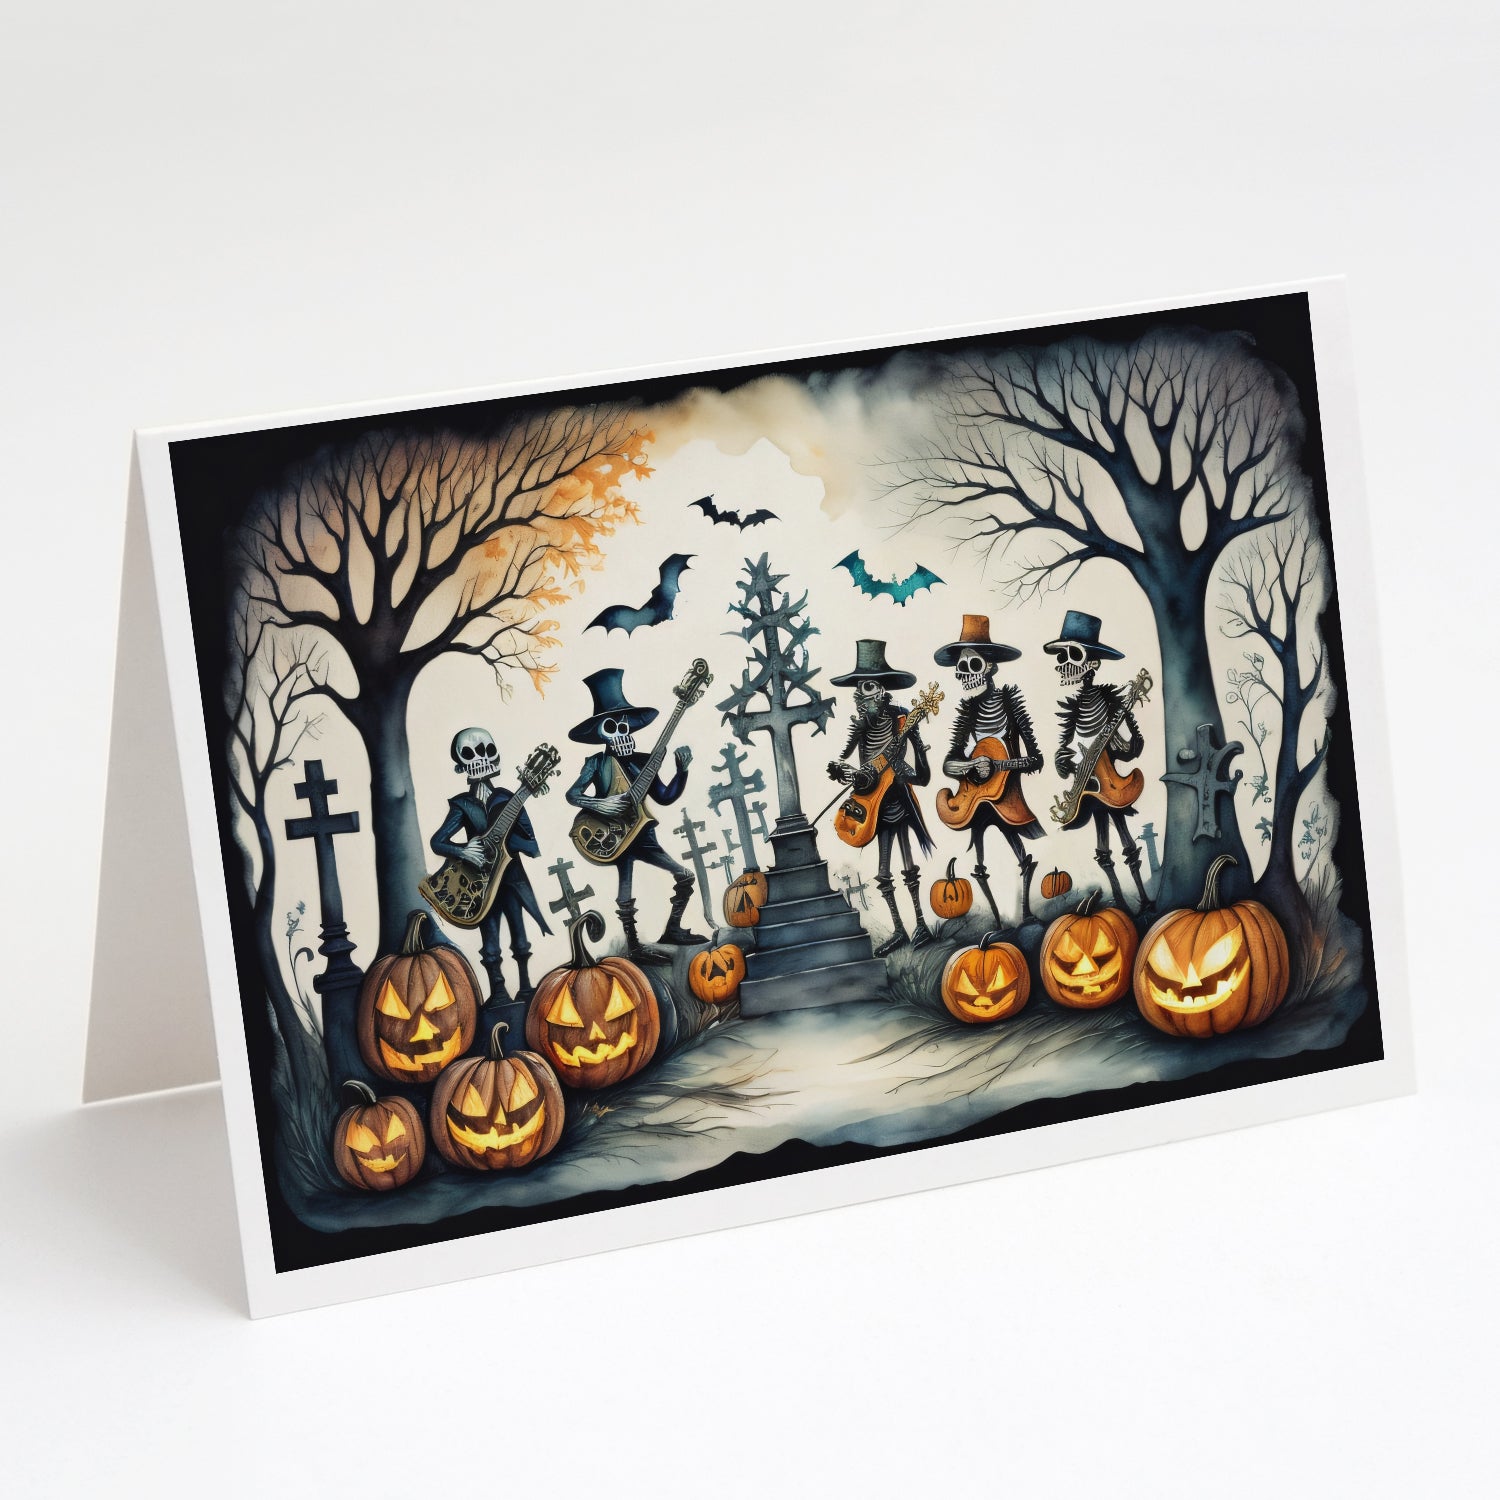 Buy this Mariachi Skeleton Band Spooky Halloween Greeting Cards and Envelopes Pack of 8